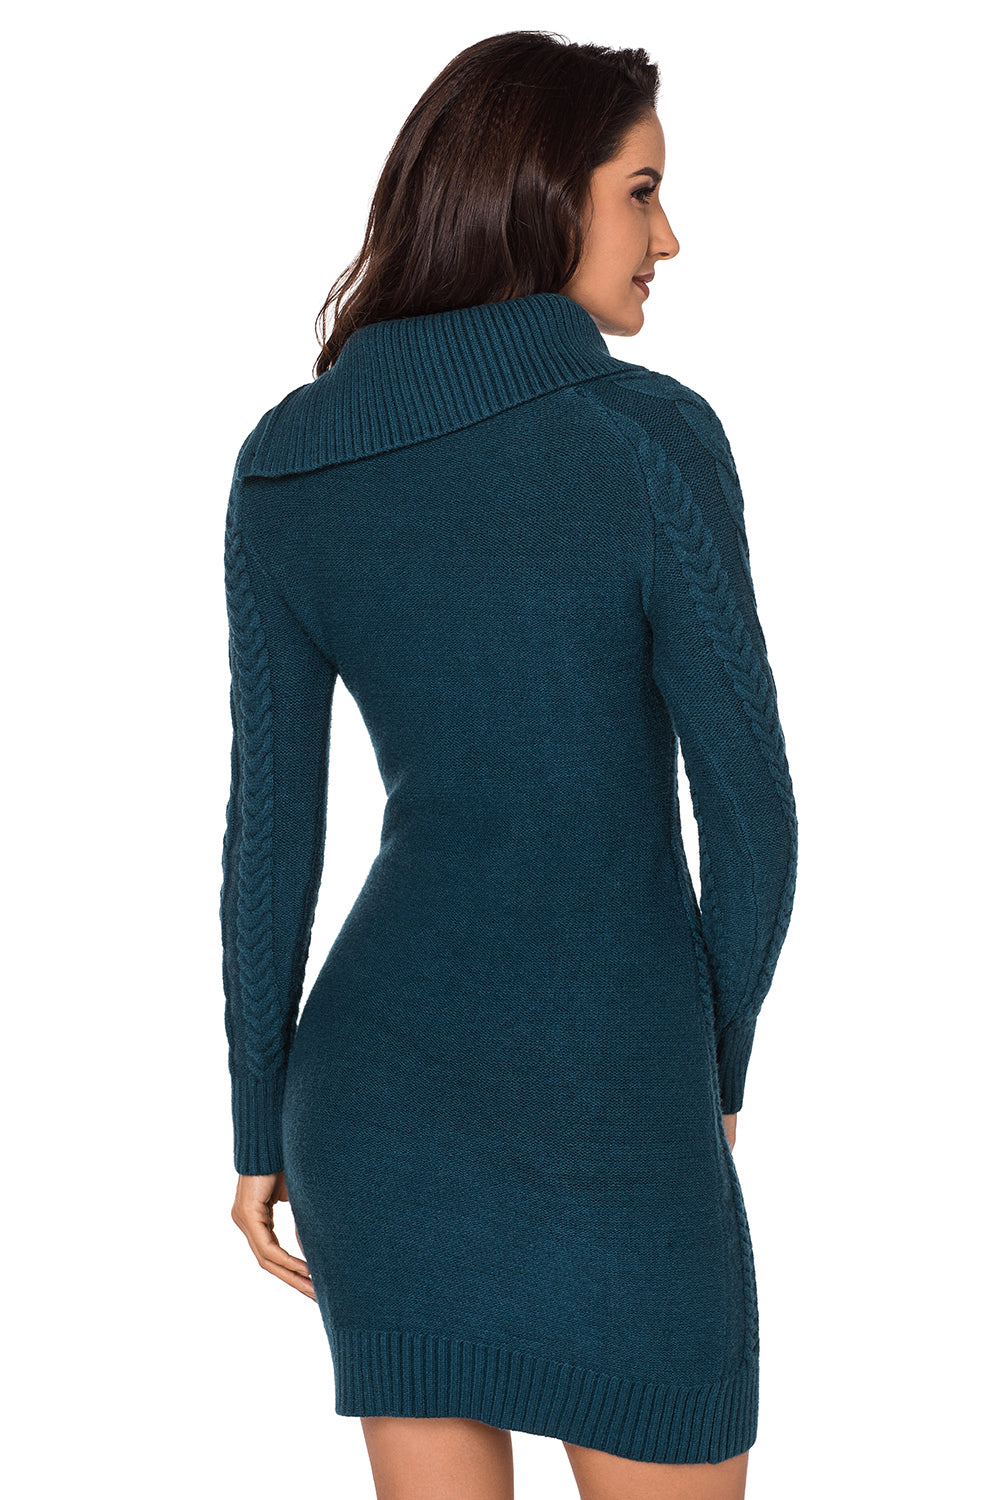 Asymmetric Buttoned Collar Biscay Bodycon Sweater Dress